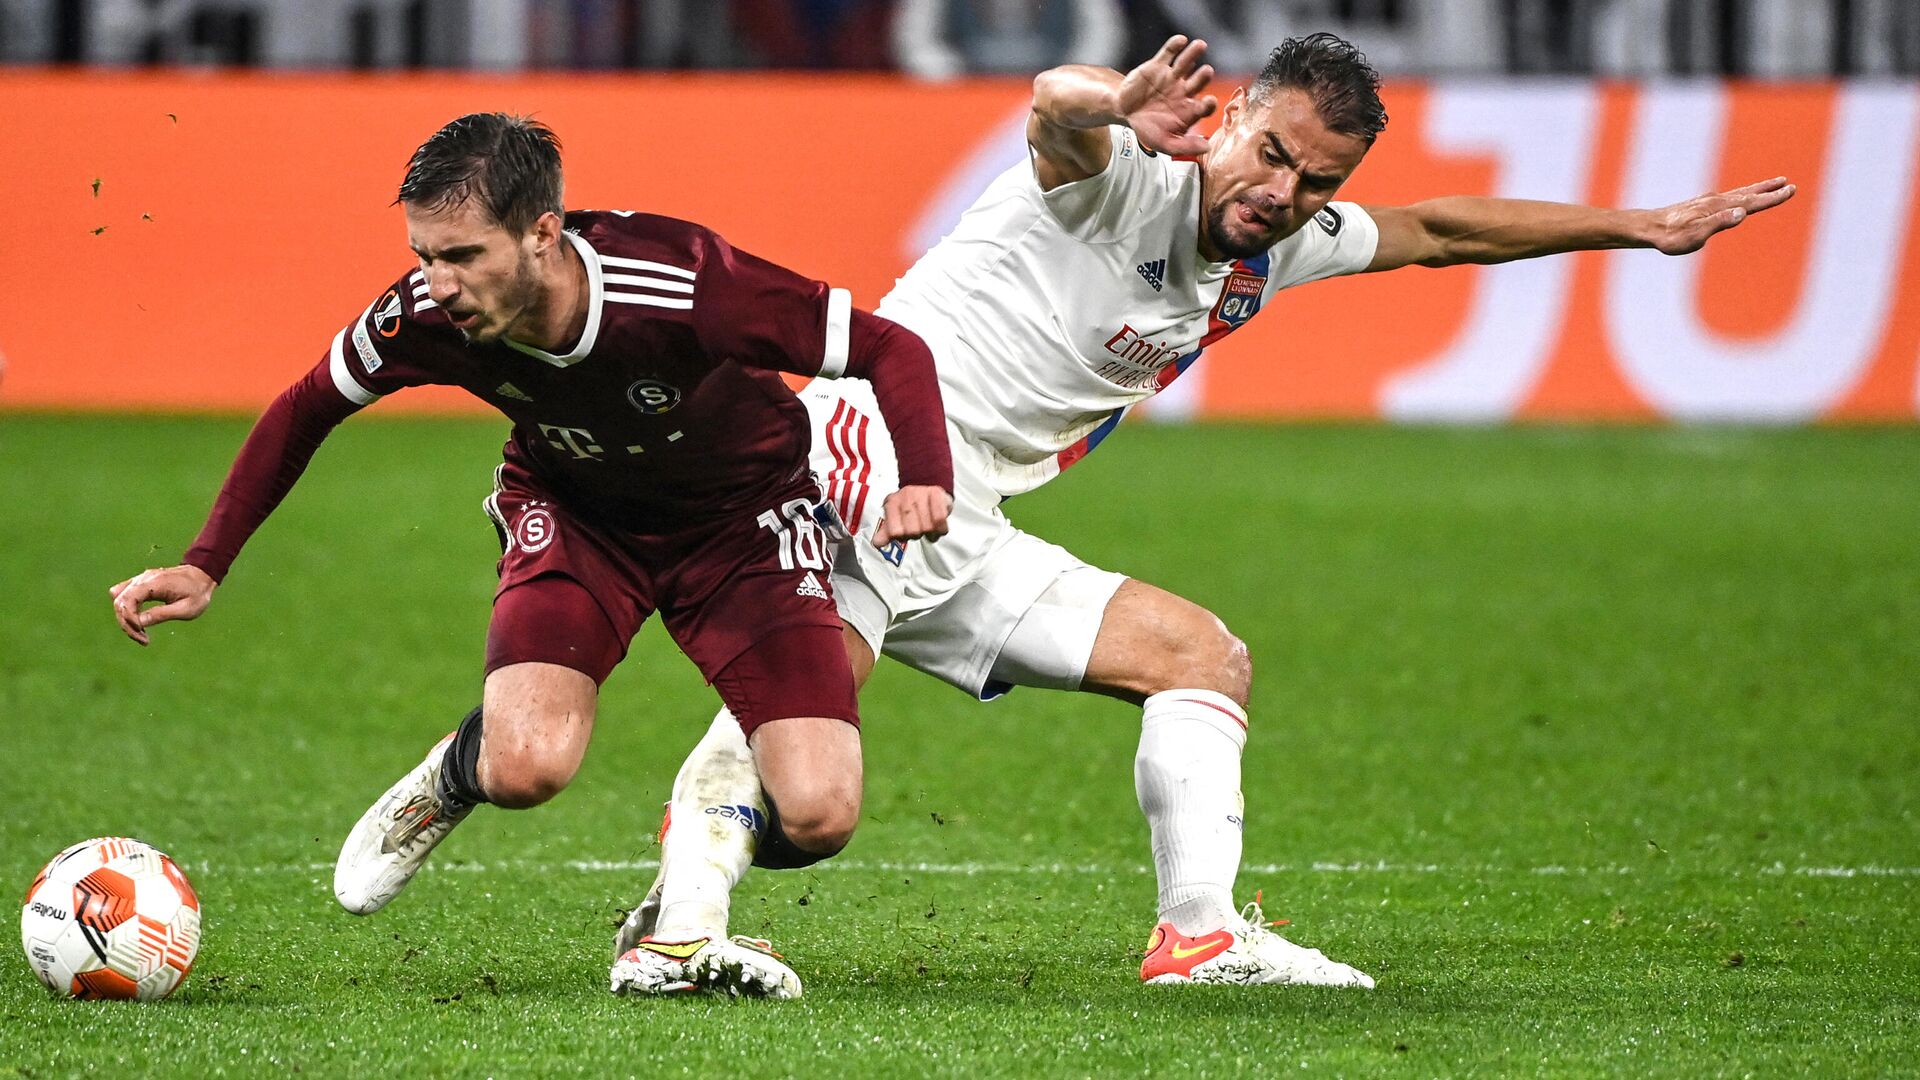 Lyon's French defender Damien Da Silva (R) fights for the ball with Sparta Praha's Czech Matej Pulkrab (L) during the UEFA Europa League group A football match between Olympique Lyonnais and AC Sparta Praha at the Groupama Stadium in Decines-Charpieu, central-eastern France near Lyon on November 4, 2021. (Photo by OLIVIER CHASSIGNOLE / AFP) - РИА Новости, 1920, 04.11.2021